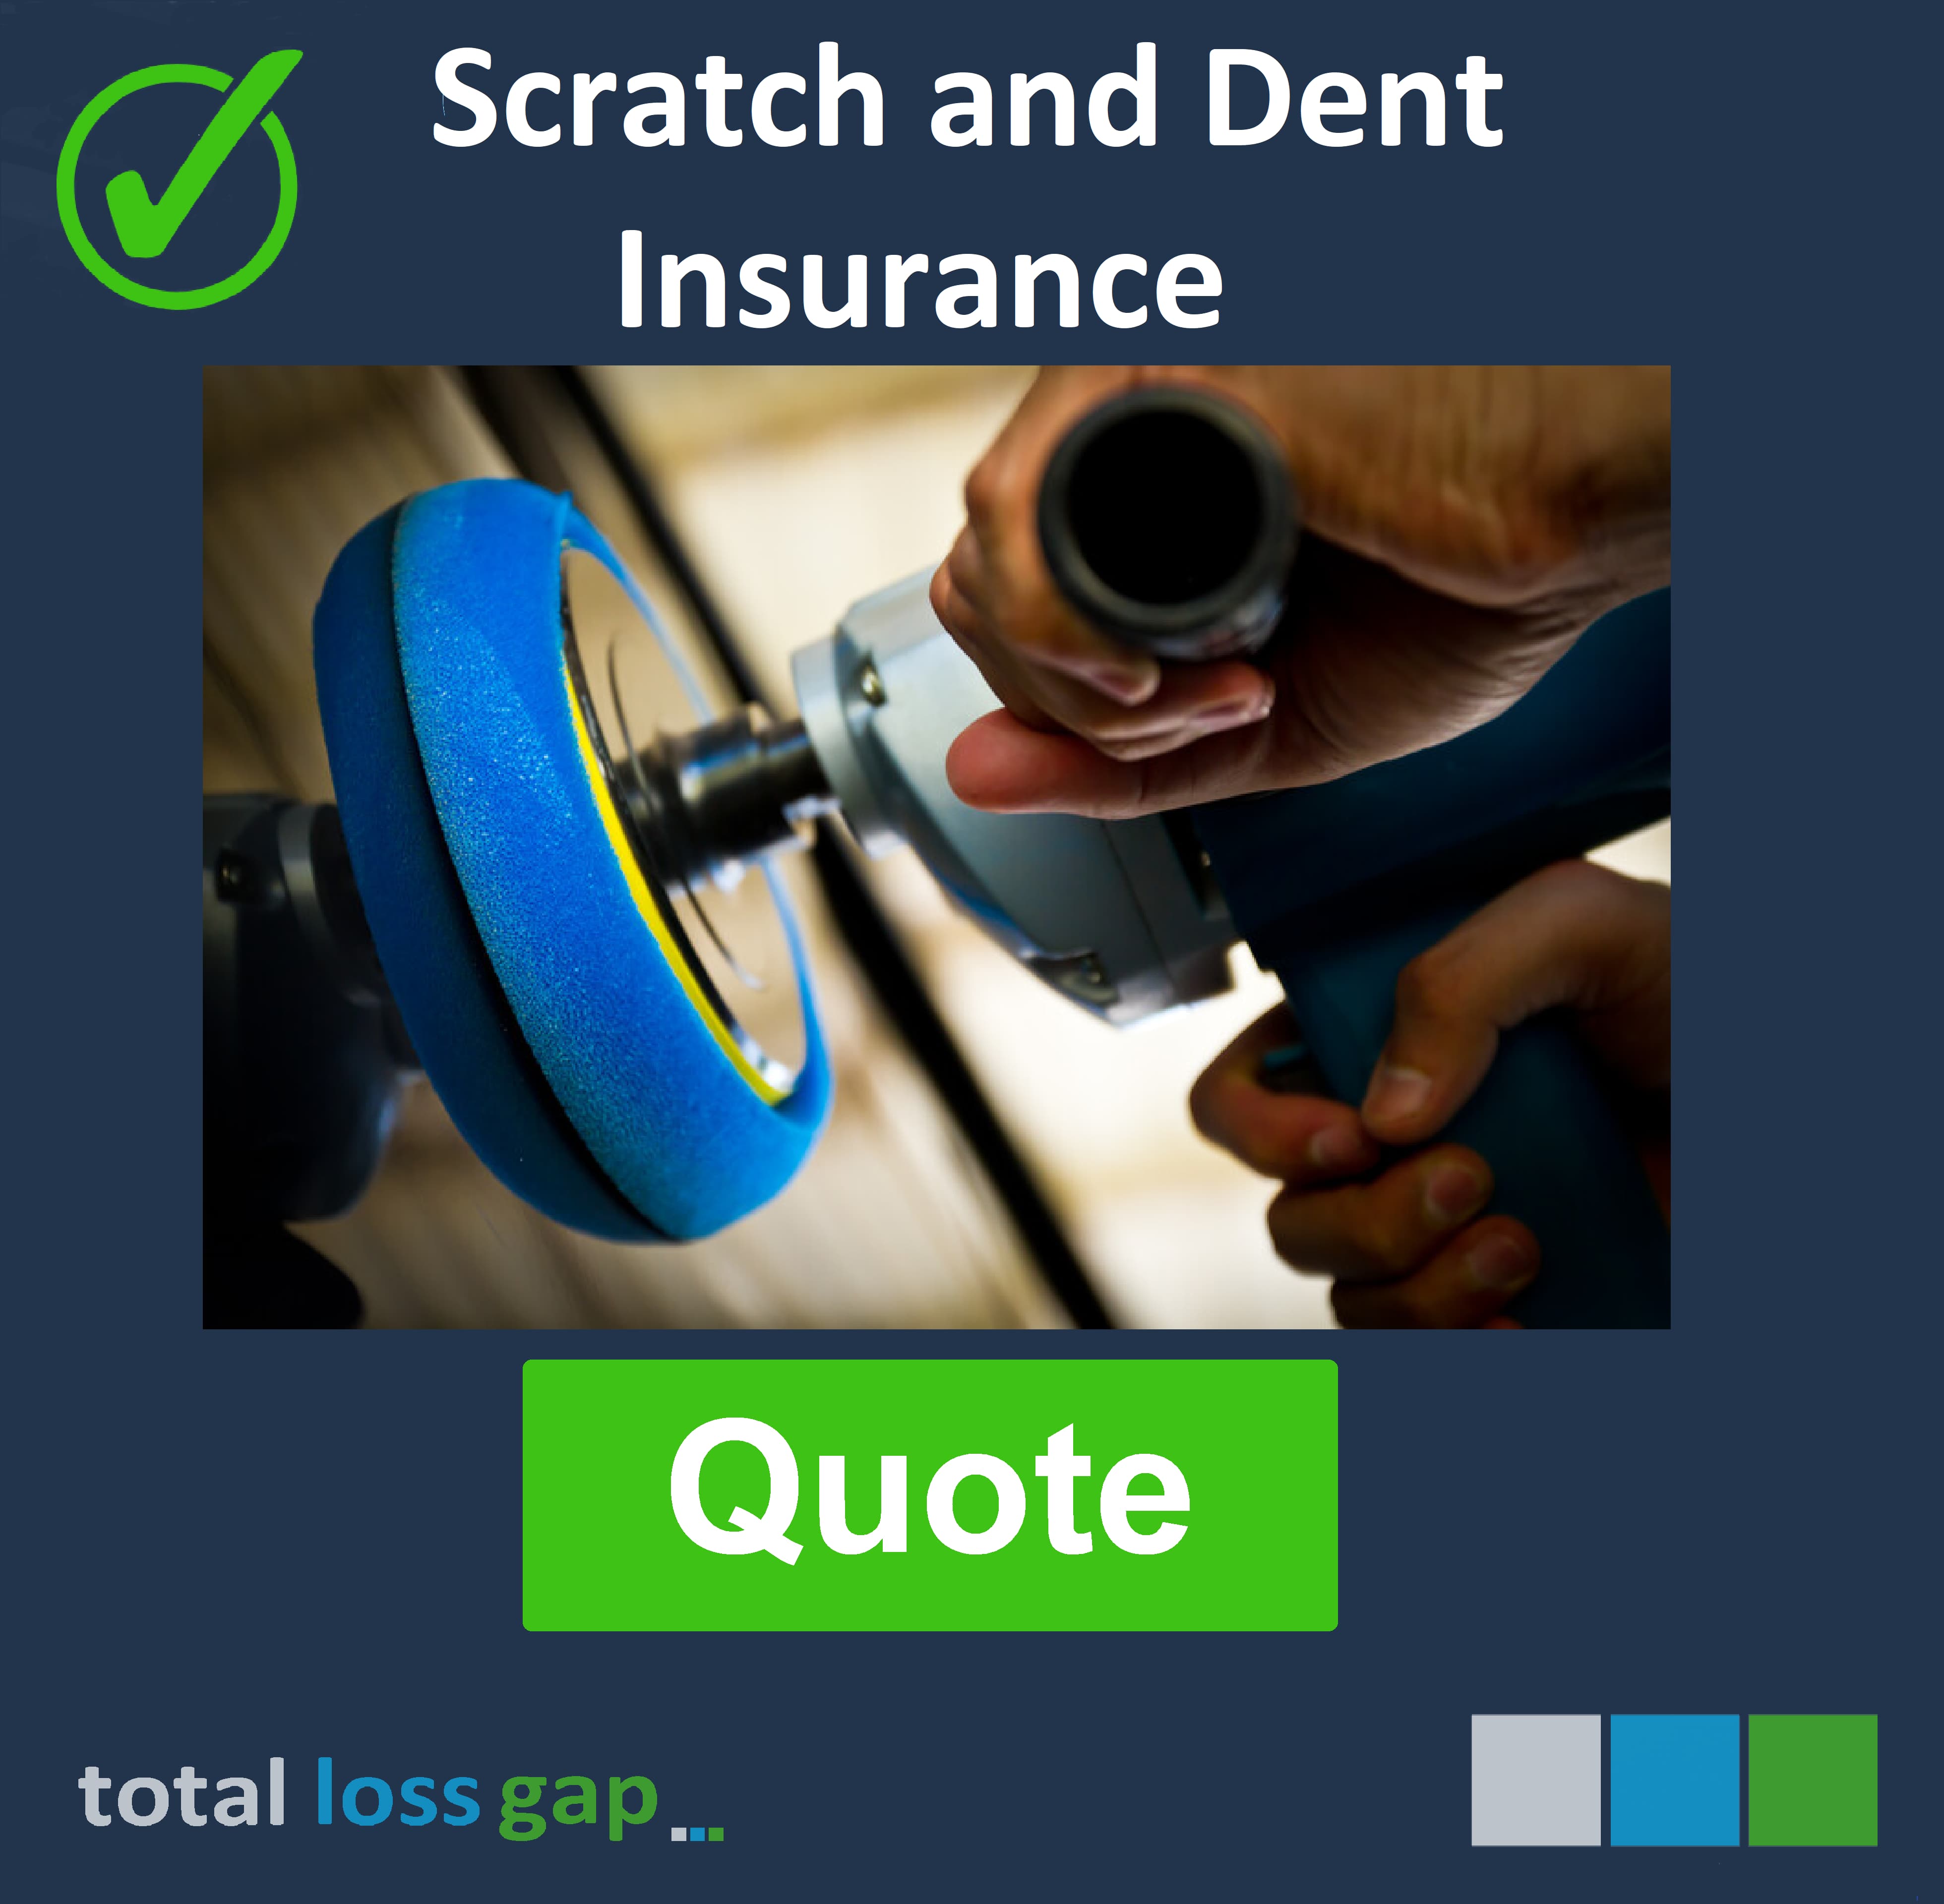 Scrath and Dent insurance for your Audi